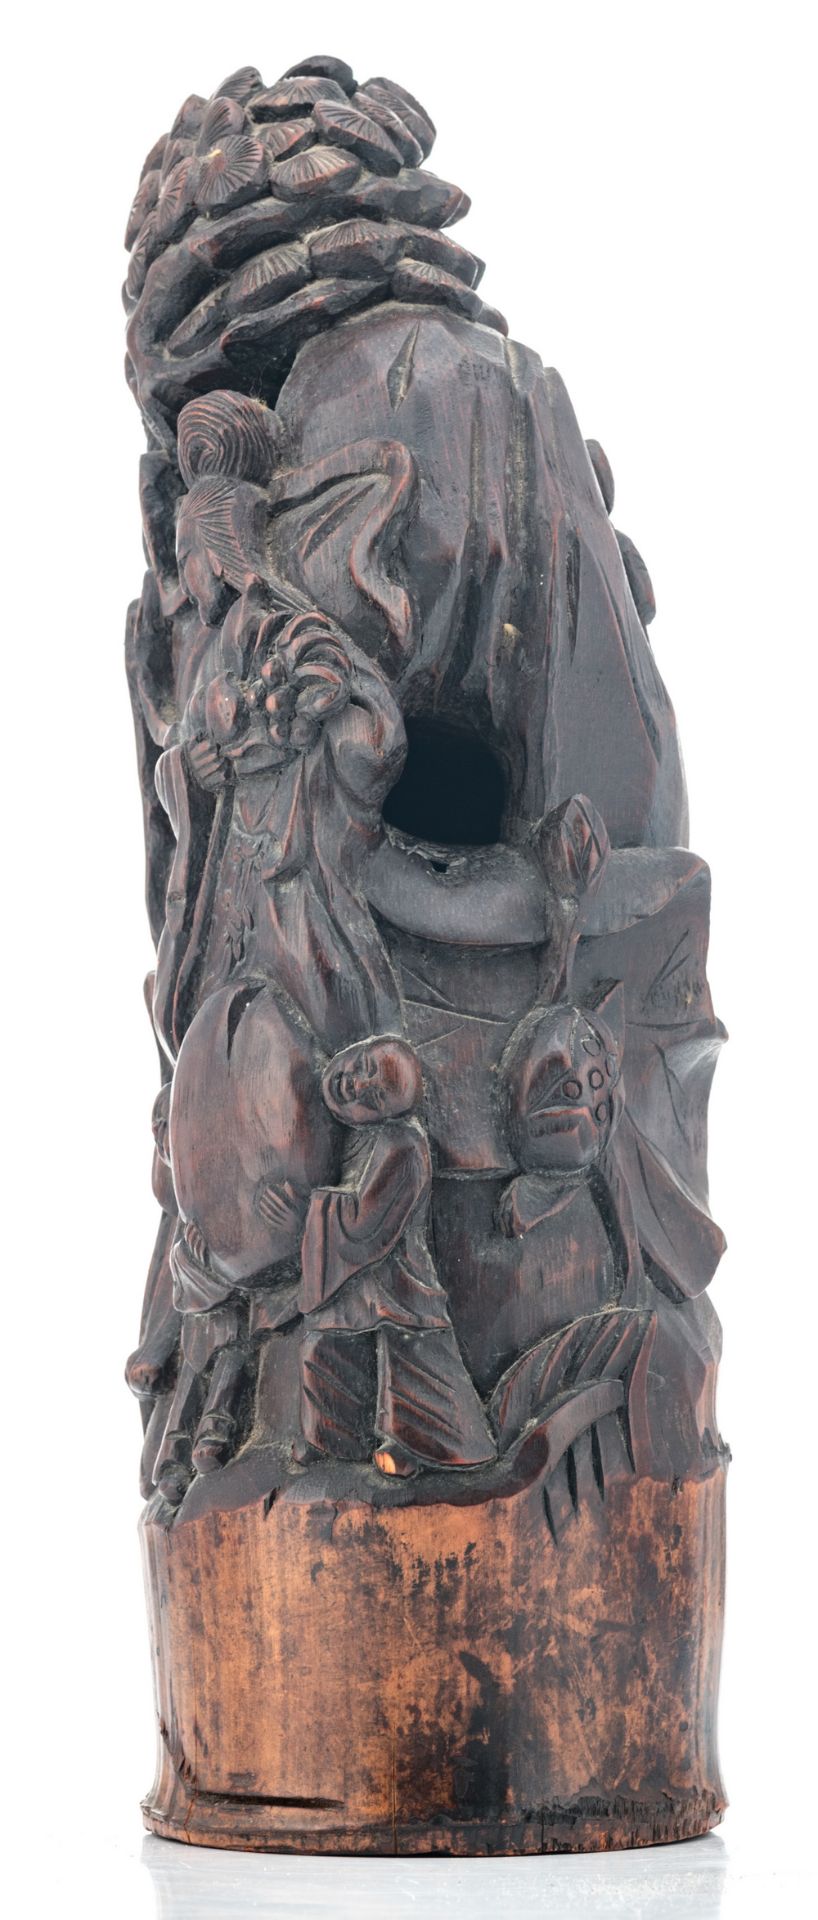 A Chinese bamboo sculpture, depicting the figures of Shou Xing, a Guanyin and some servants, H 40 cm - Image 4 of 6